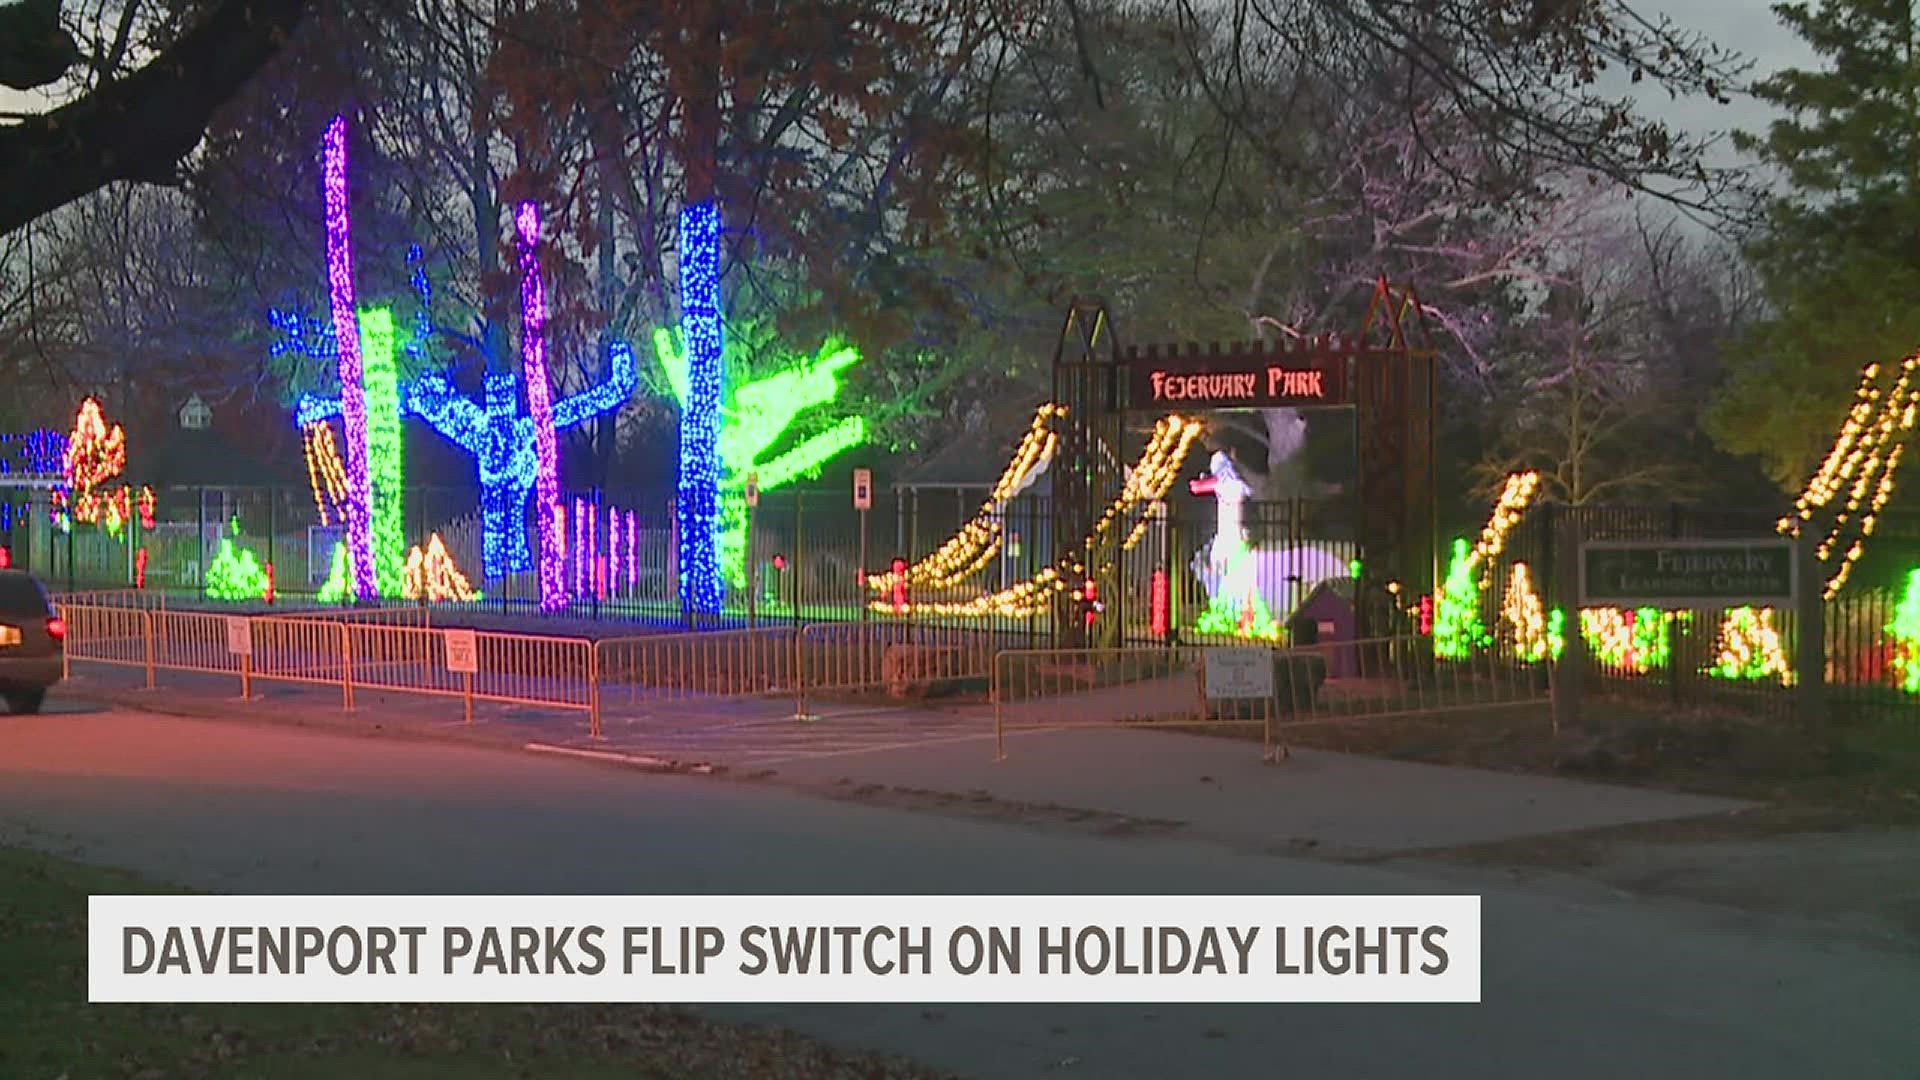 Fejervary Park's light display runs through Jan. 8, with shows every half-hour starting at 5 p.m. VanderVeer Park's decorations are up until Jan. 13.